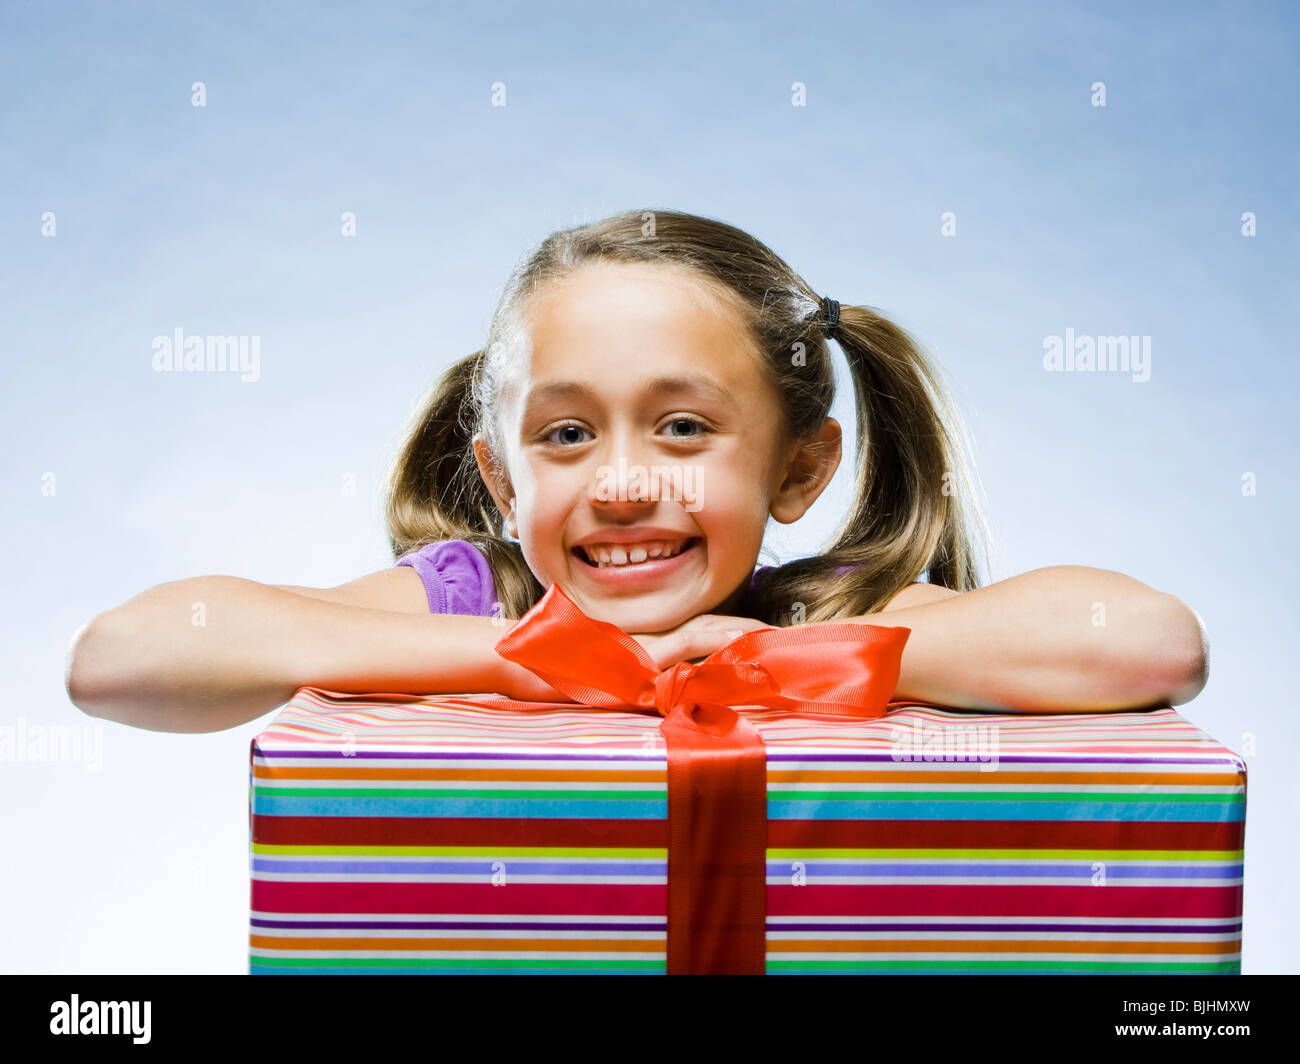 girl looking at the camera resting her head on a present Stock Photo